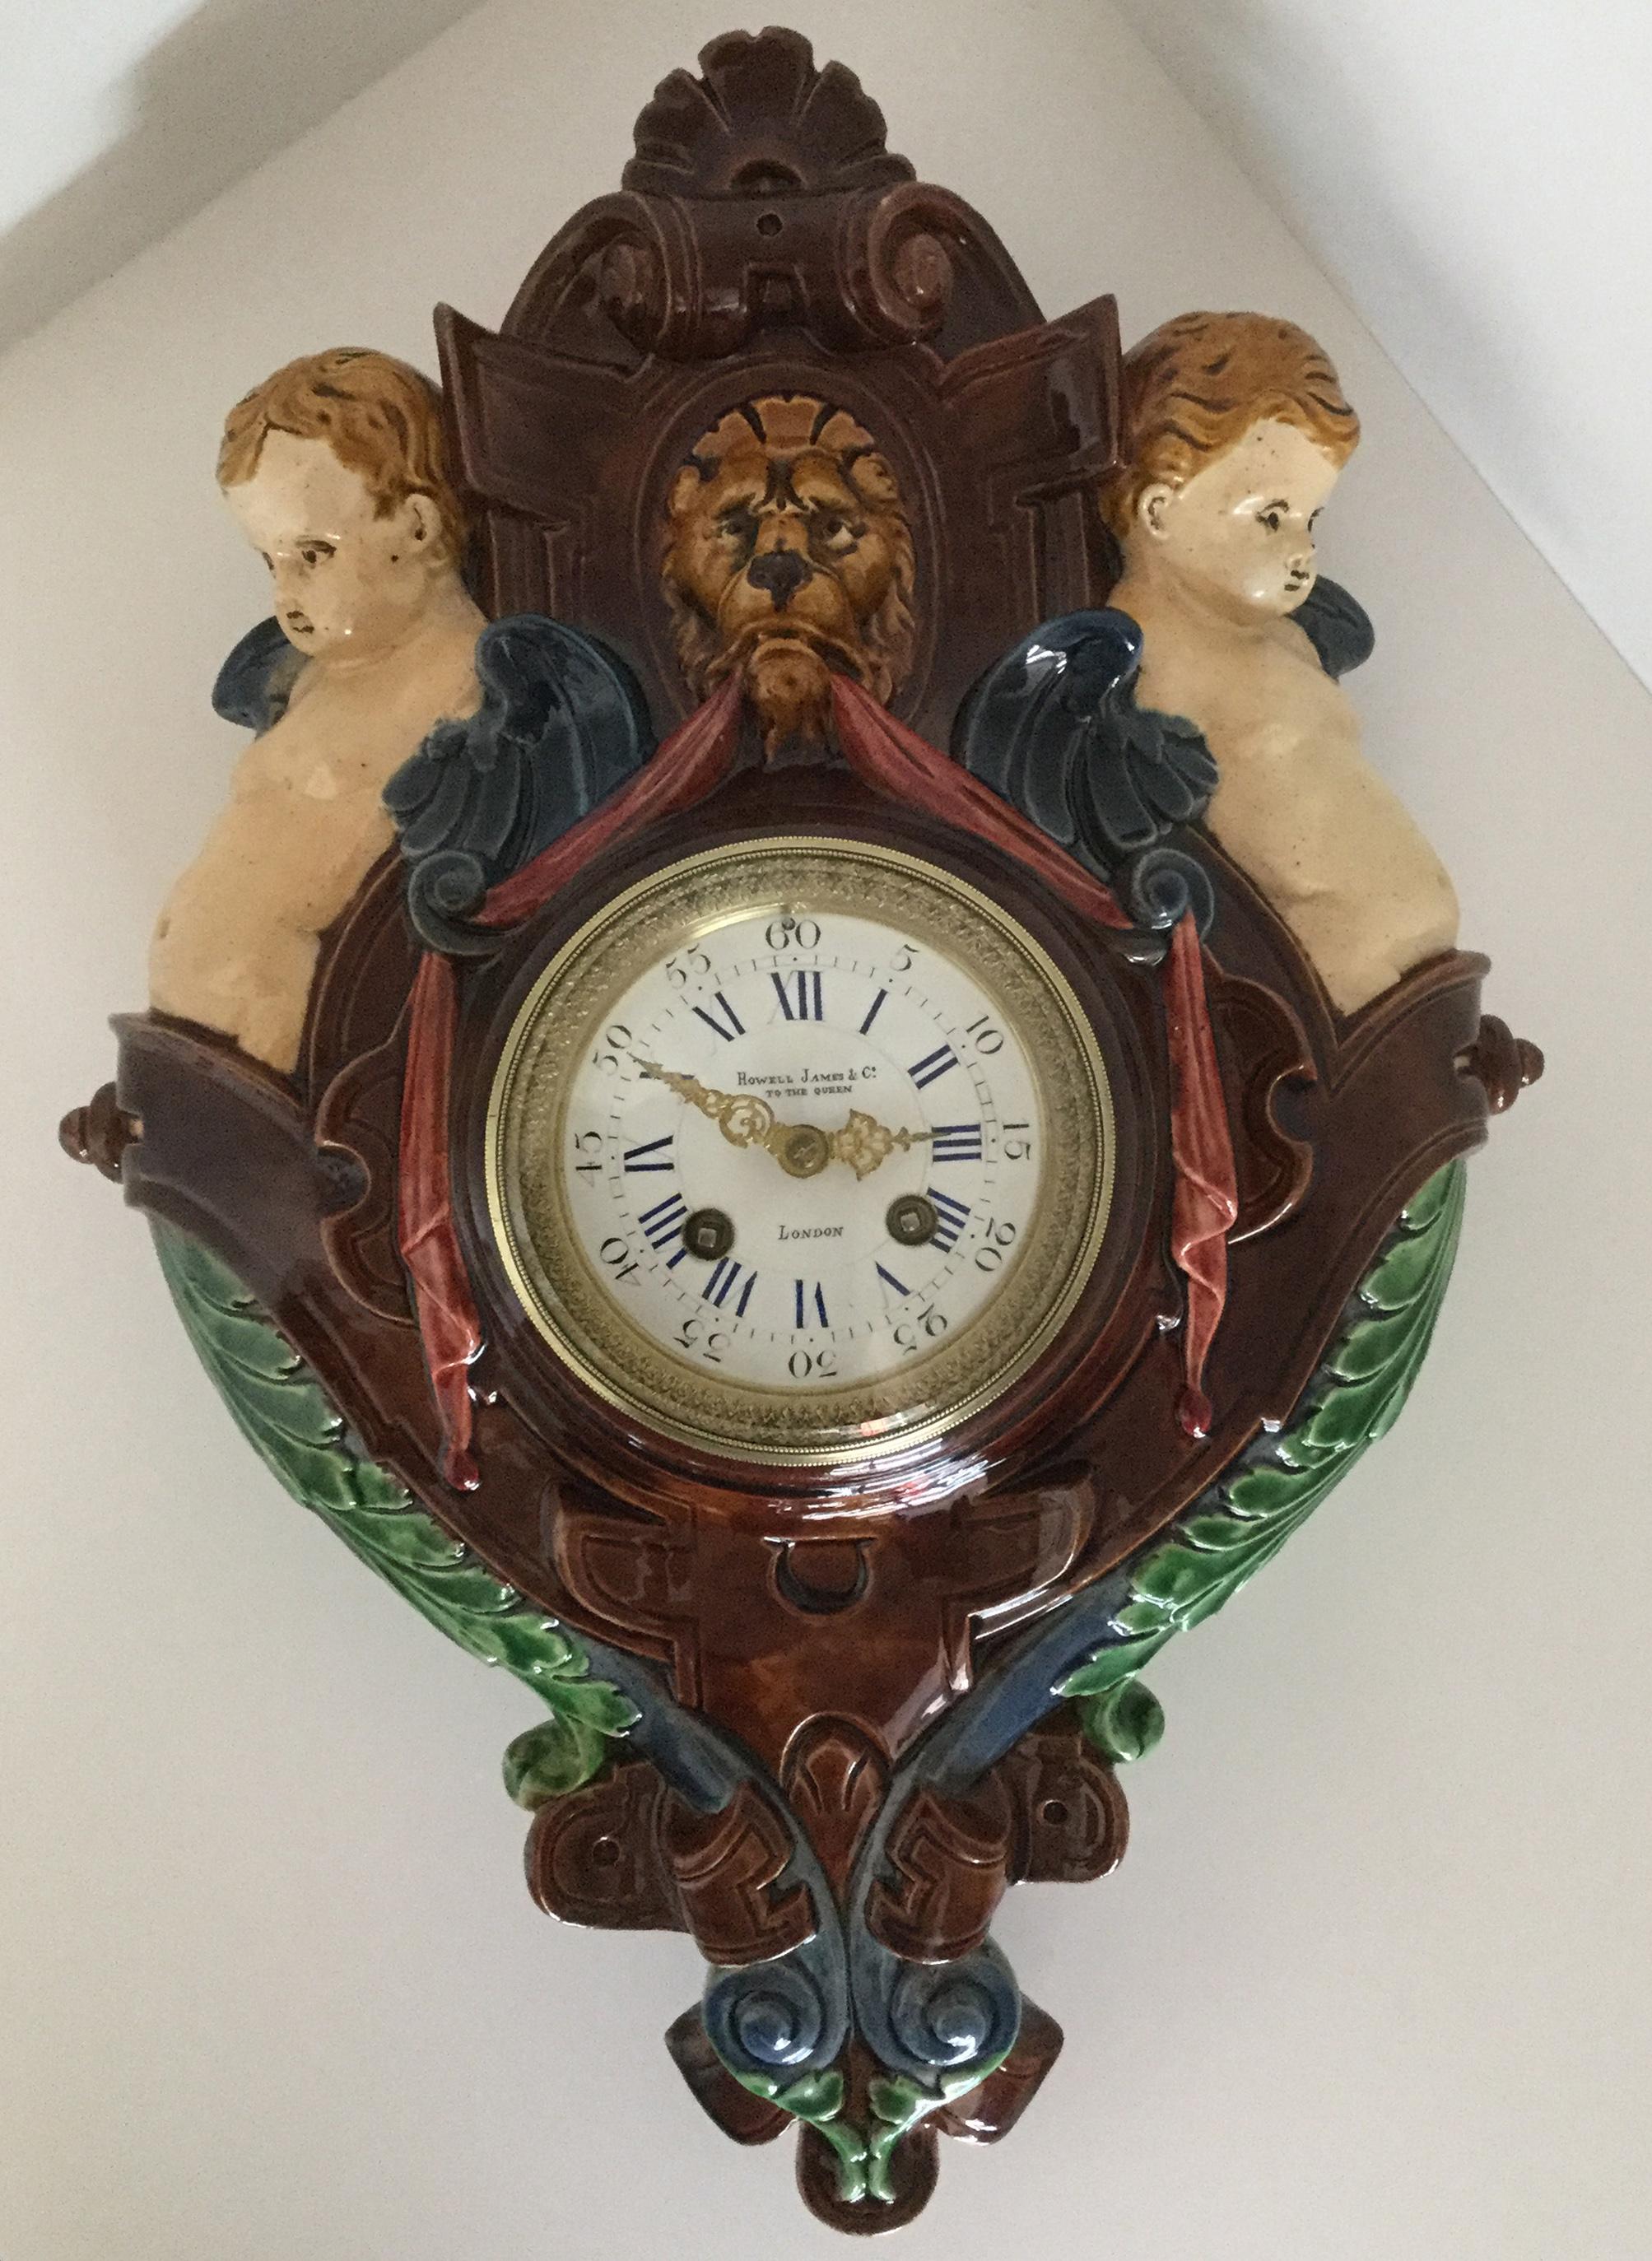 A very rare decorative Palissy Ware Majolica 8 day striking wall clock, circa 1870, on multicolored ground, with green, cream, red, blue and brown decoration, surmounted by a lions head flanked by twin putti, with ribbon, leaf and scroll decoration,